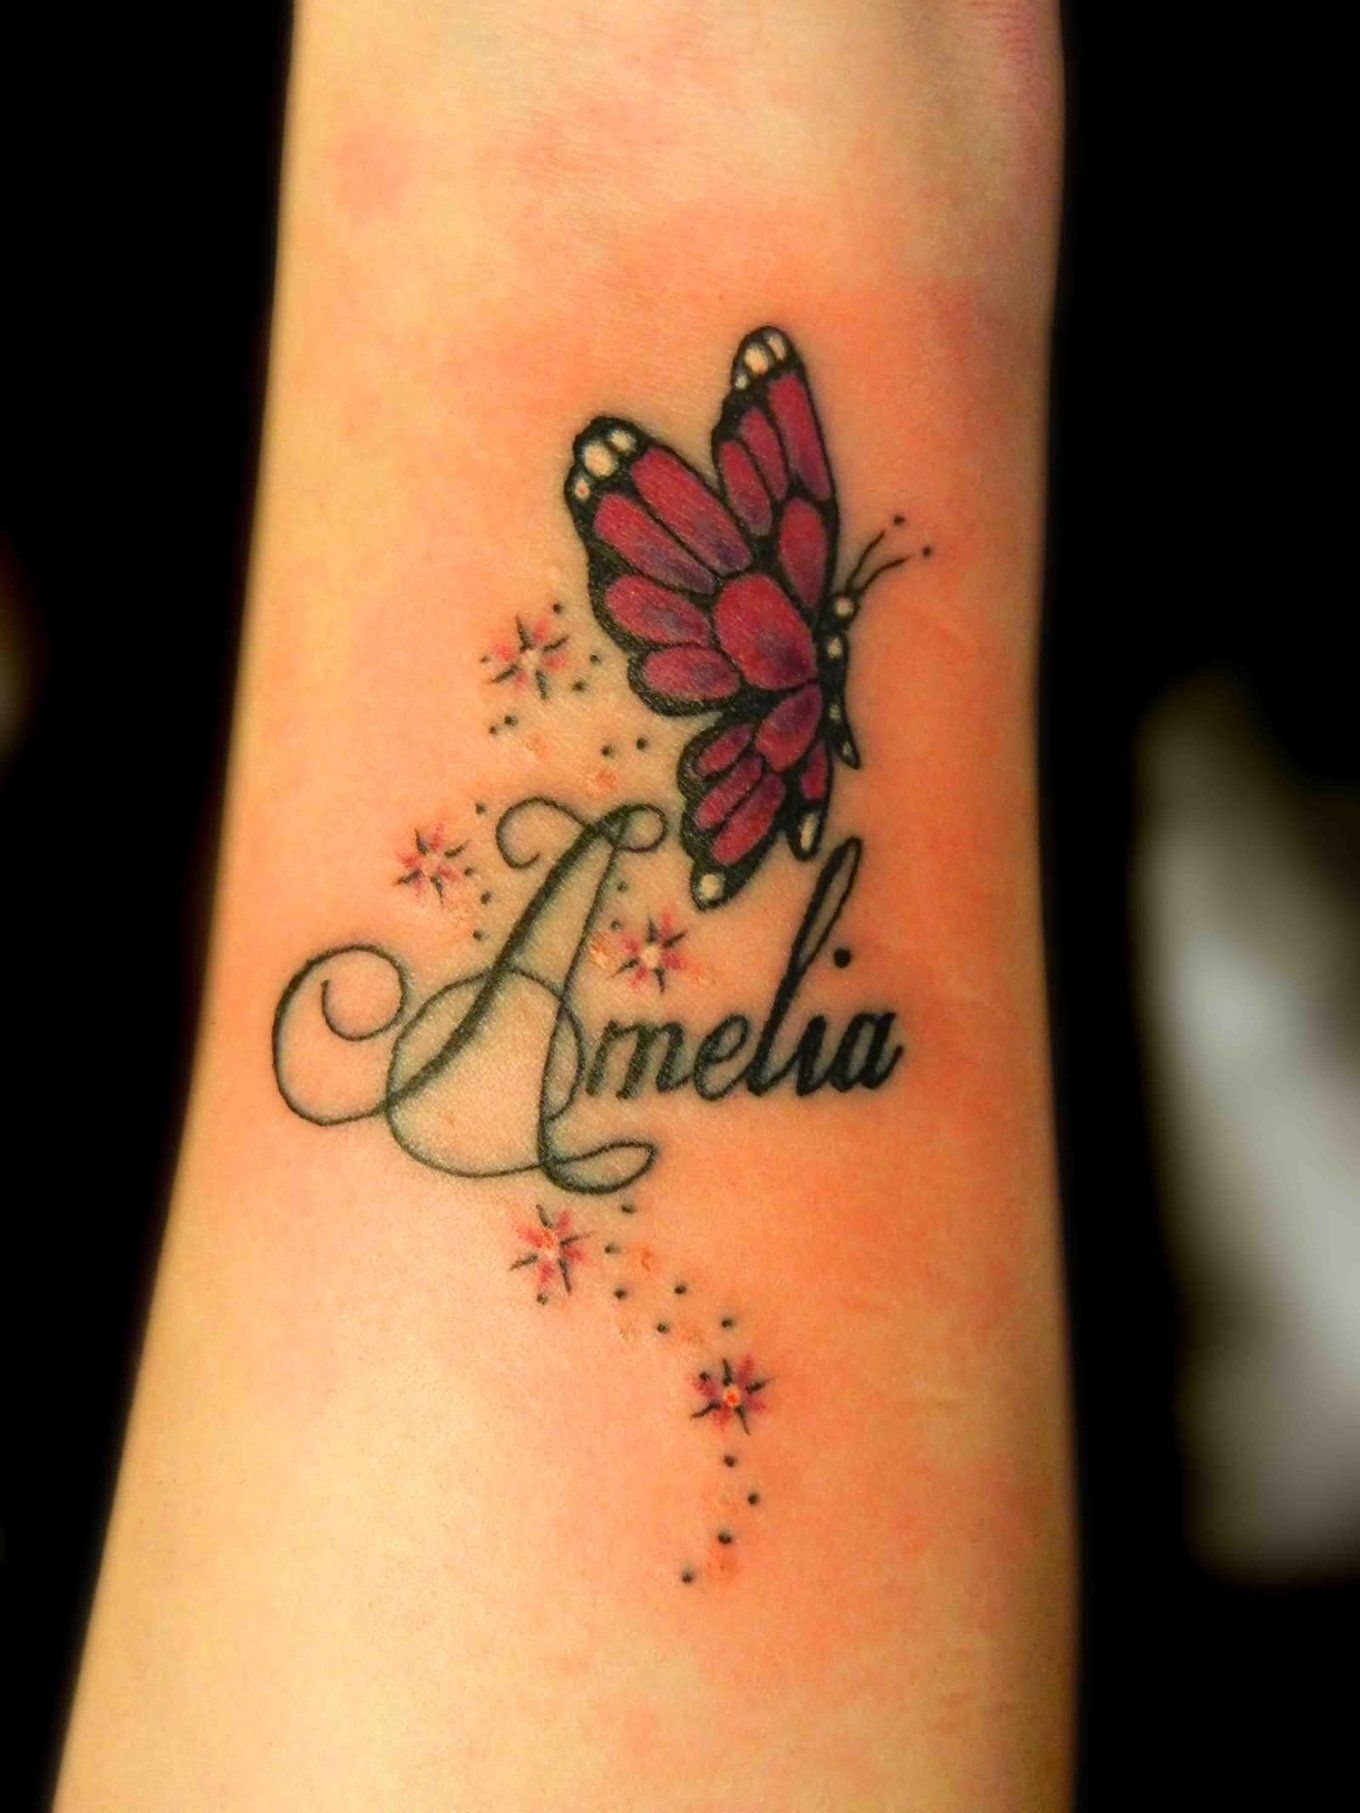 Colorful butterfly with name tattoo on wrist